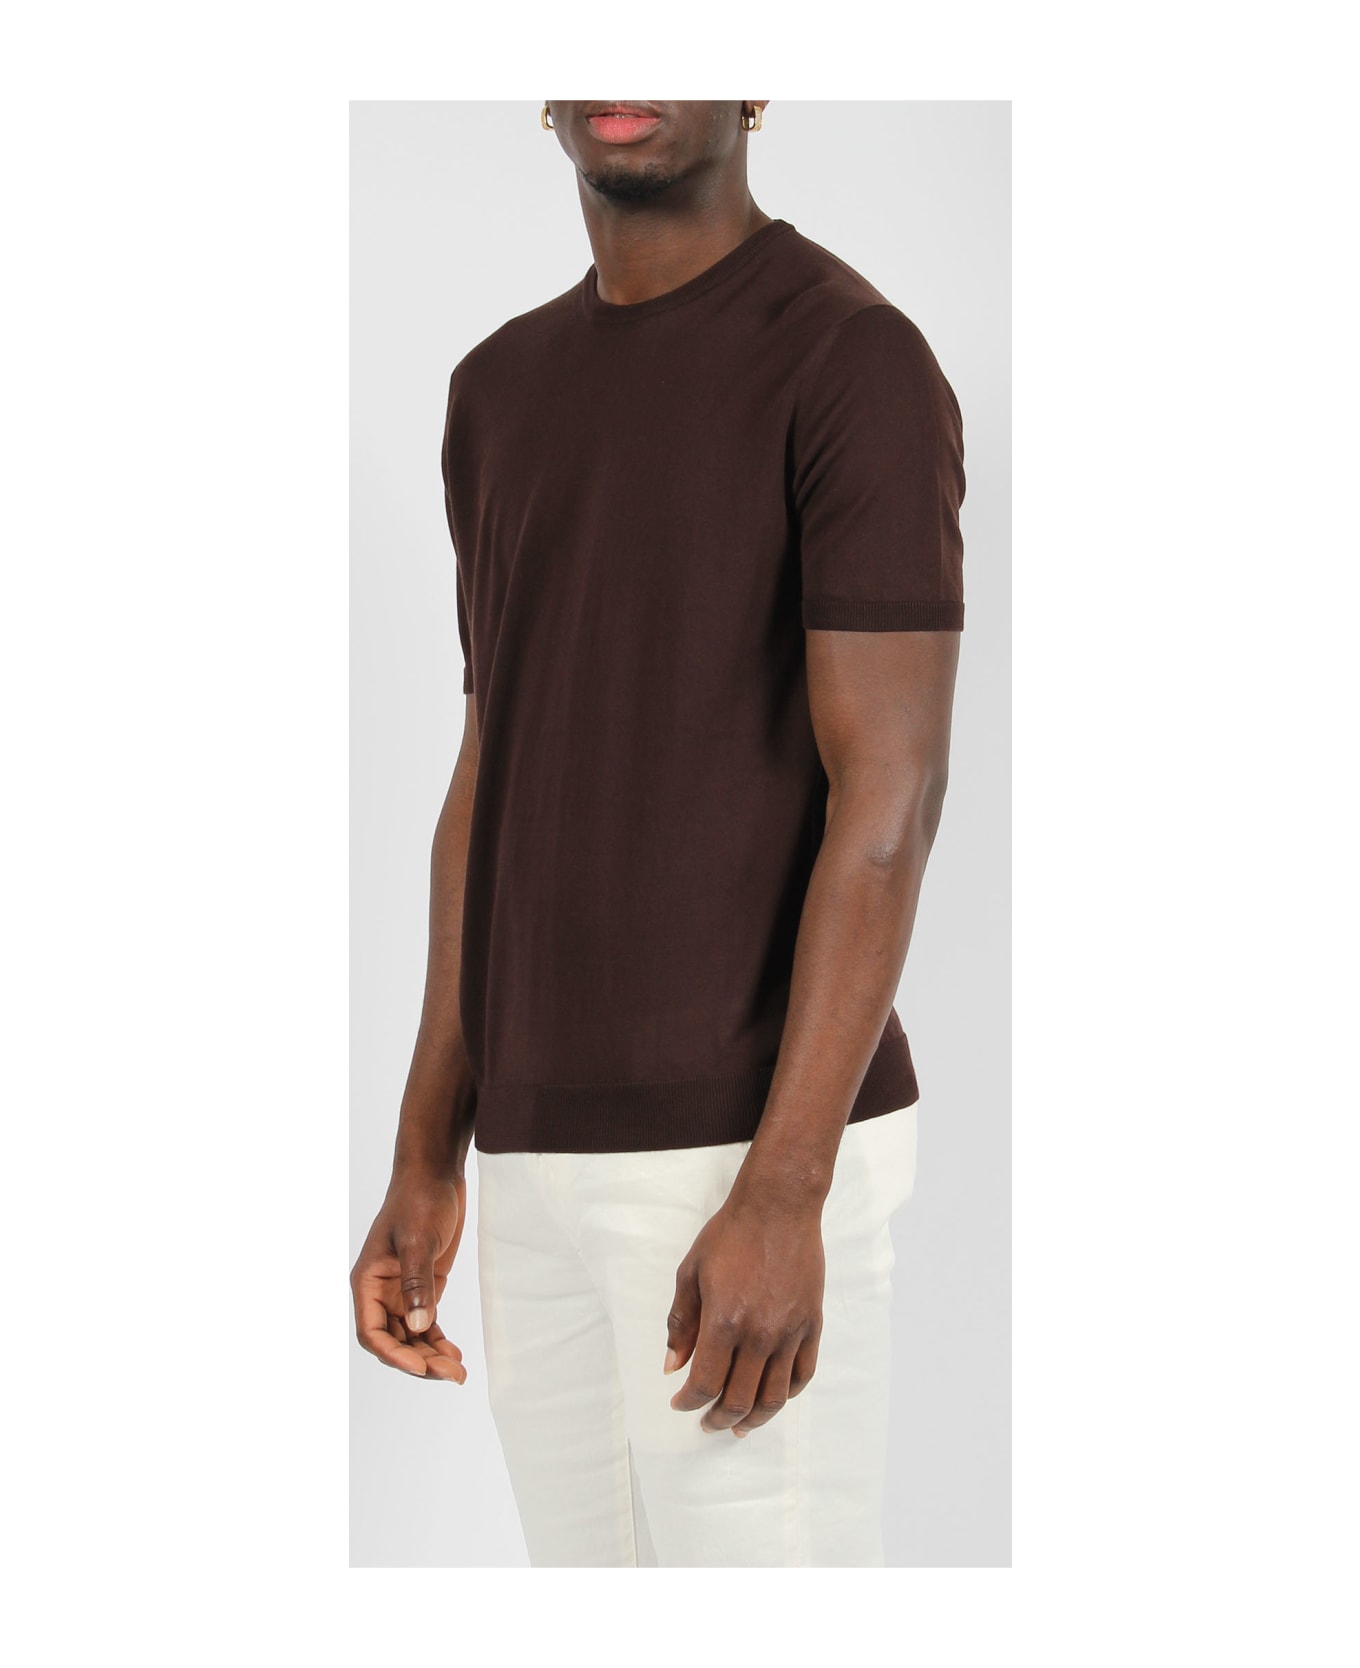 Roberto Collina Cotton Knit Short Sleeve Sweater - Brown シャツ